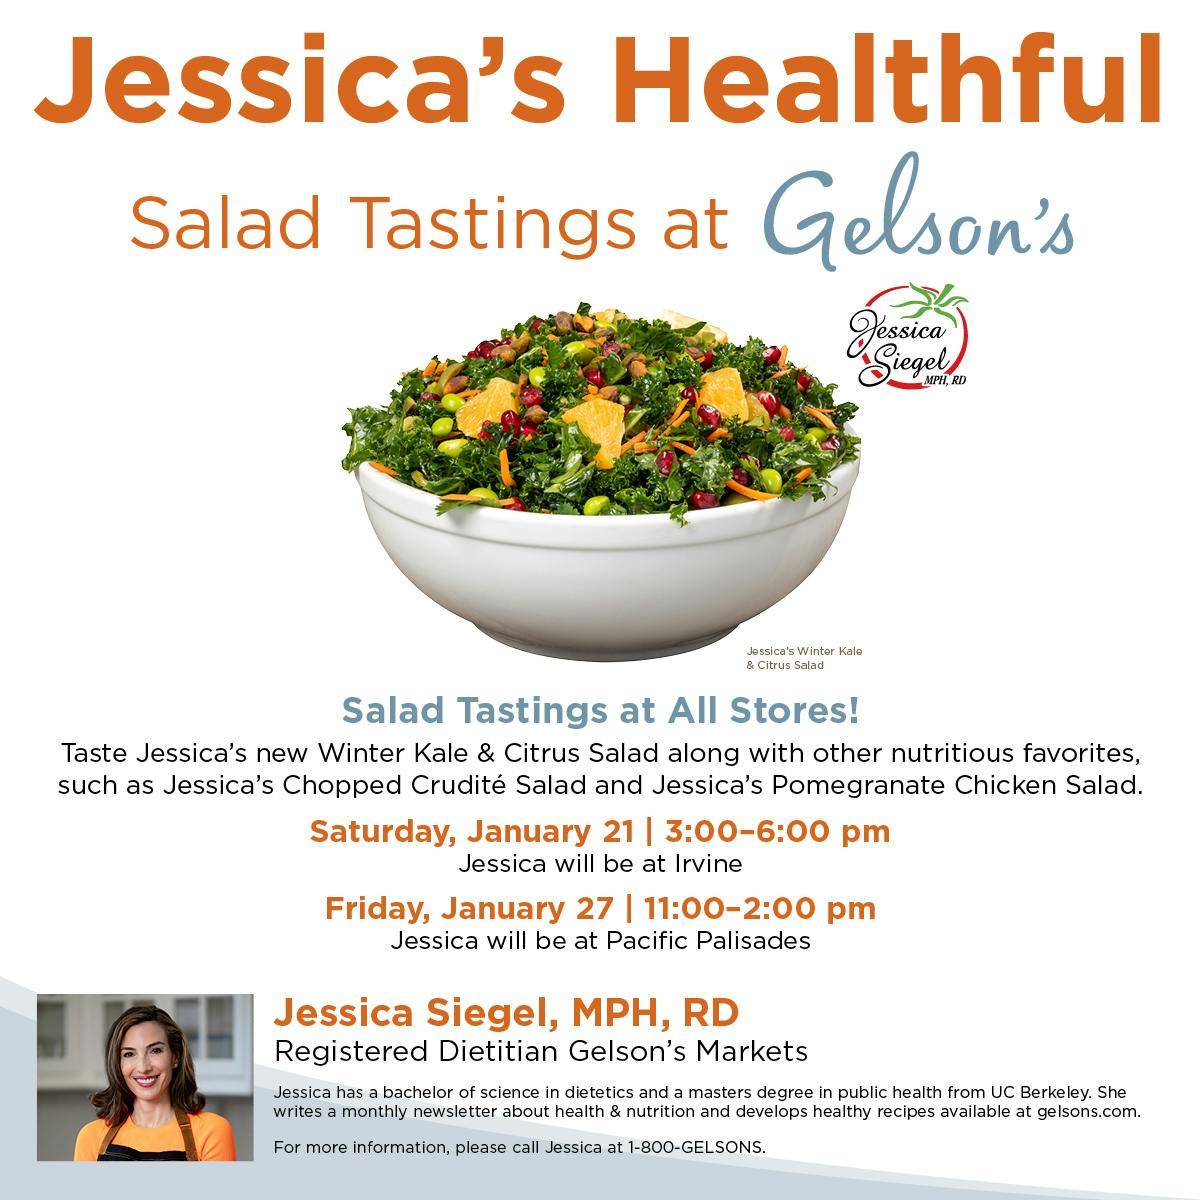 Jessica's Healthful Salad Tastings at Gelson's - Salad tastings at all stores! Taste Jessica's new Winter Kale & Citrus Salad along with other nutritious favorites, such as Jessica's Chopped Crudite Salad and Jessica's Pomegranate Chicken Salad. Saturday January 21 -6pm Jessica will be at Irvine. Friday Jauary 27 11am-2pm Jessica will be at Pacific Palisades. Jessica Siegel MPH RD Registered Dietitian at Gelson's Markets. Jessica has a bachelor of science in dietetics and a masters degree in public health from UC Berkley. She writes monthly newsletters about health and nutrition and develops healthy recipes available at gelsons.com. For more information, please call Jessica at 1-800-gelsons